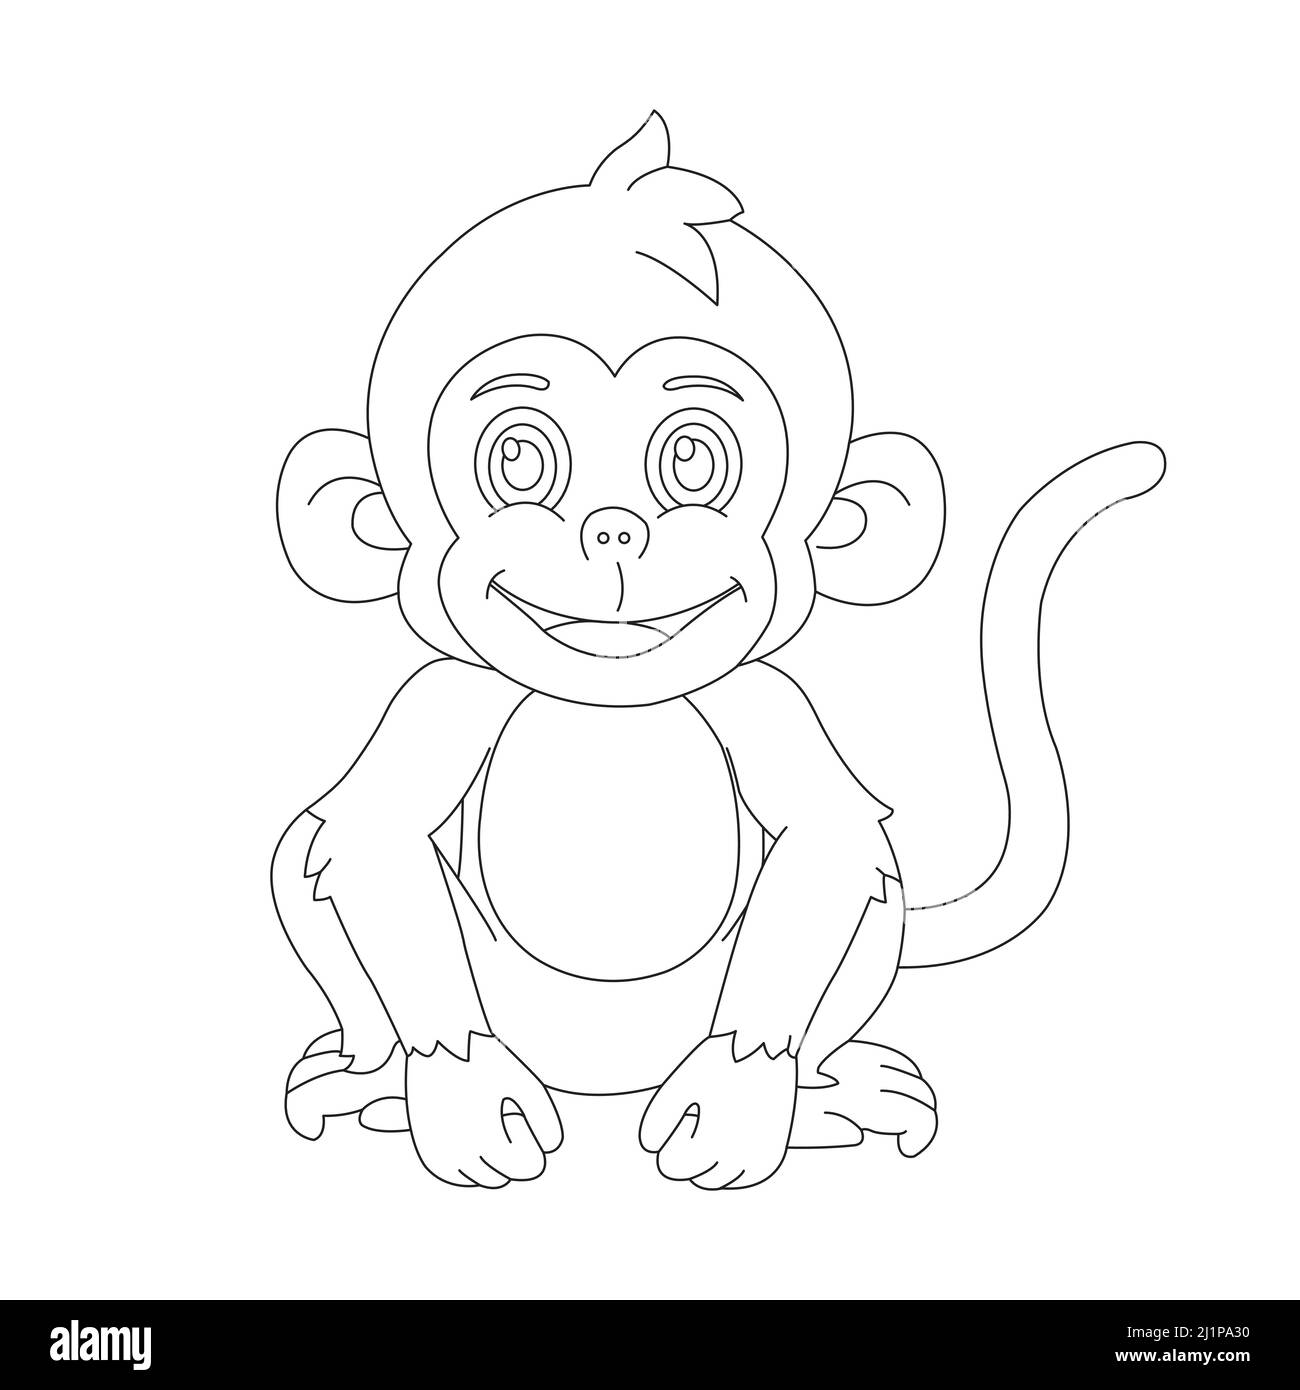 Cute little monkey outline coloring page for kids animal coloring ...